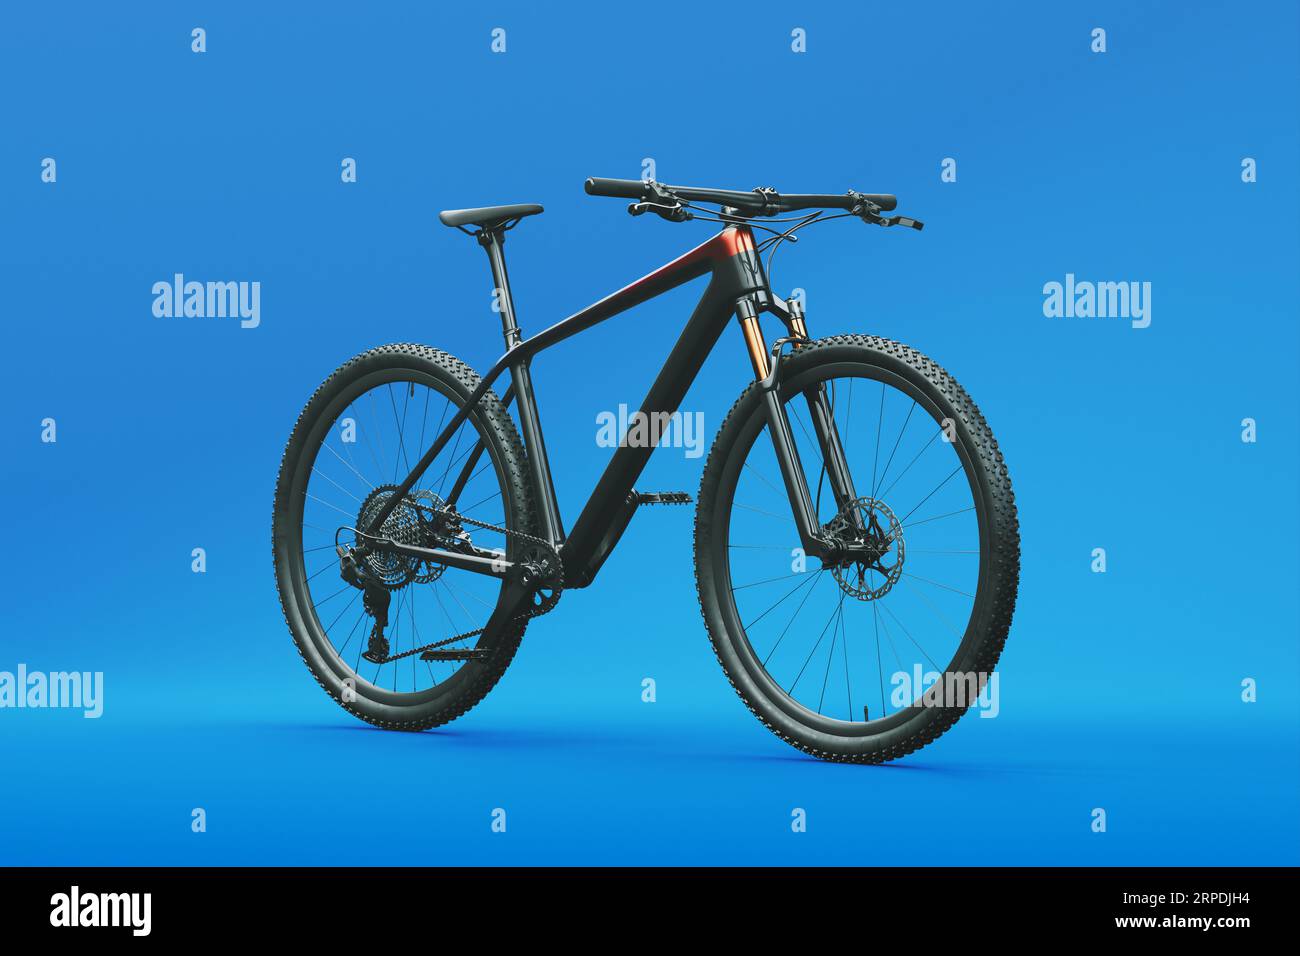 The image showcases a mountain bike in a studio setting against a blue background